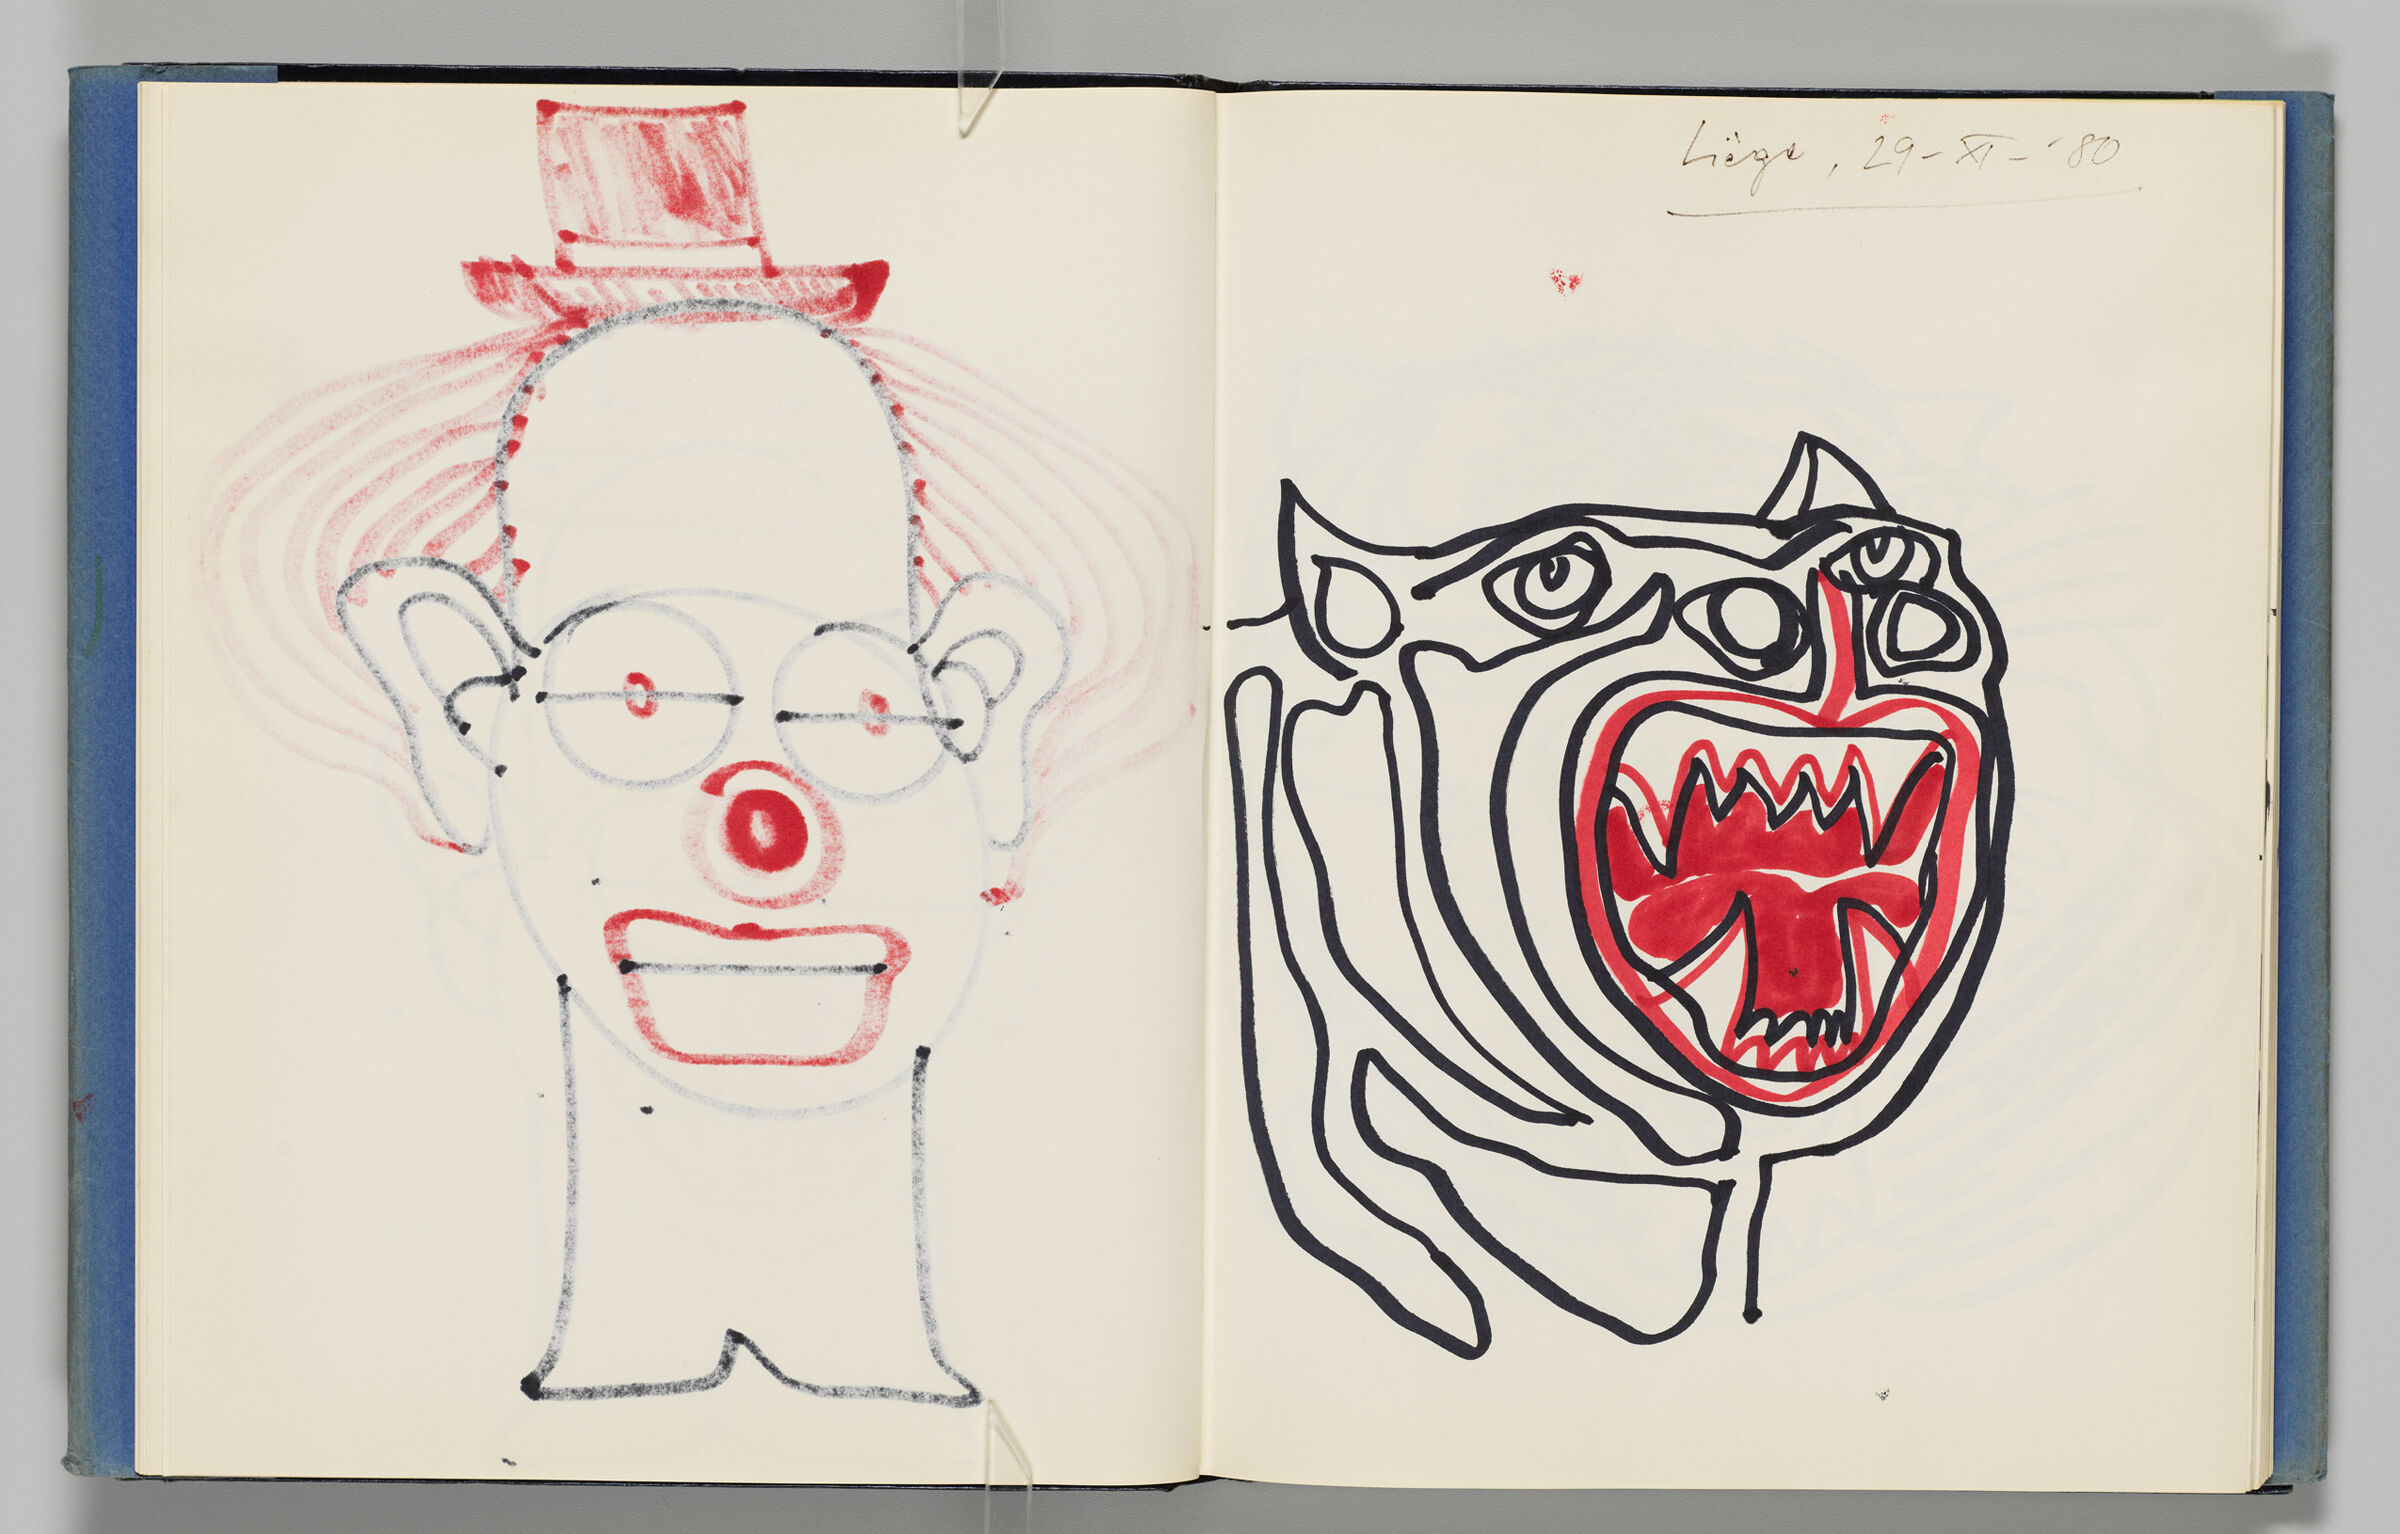 Untitled (Bleed-Through Of Previous Page, Left Page); Untitled (Tiger, Right Page)